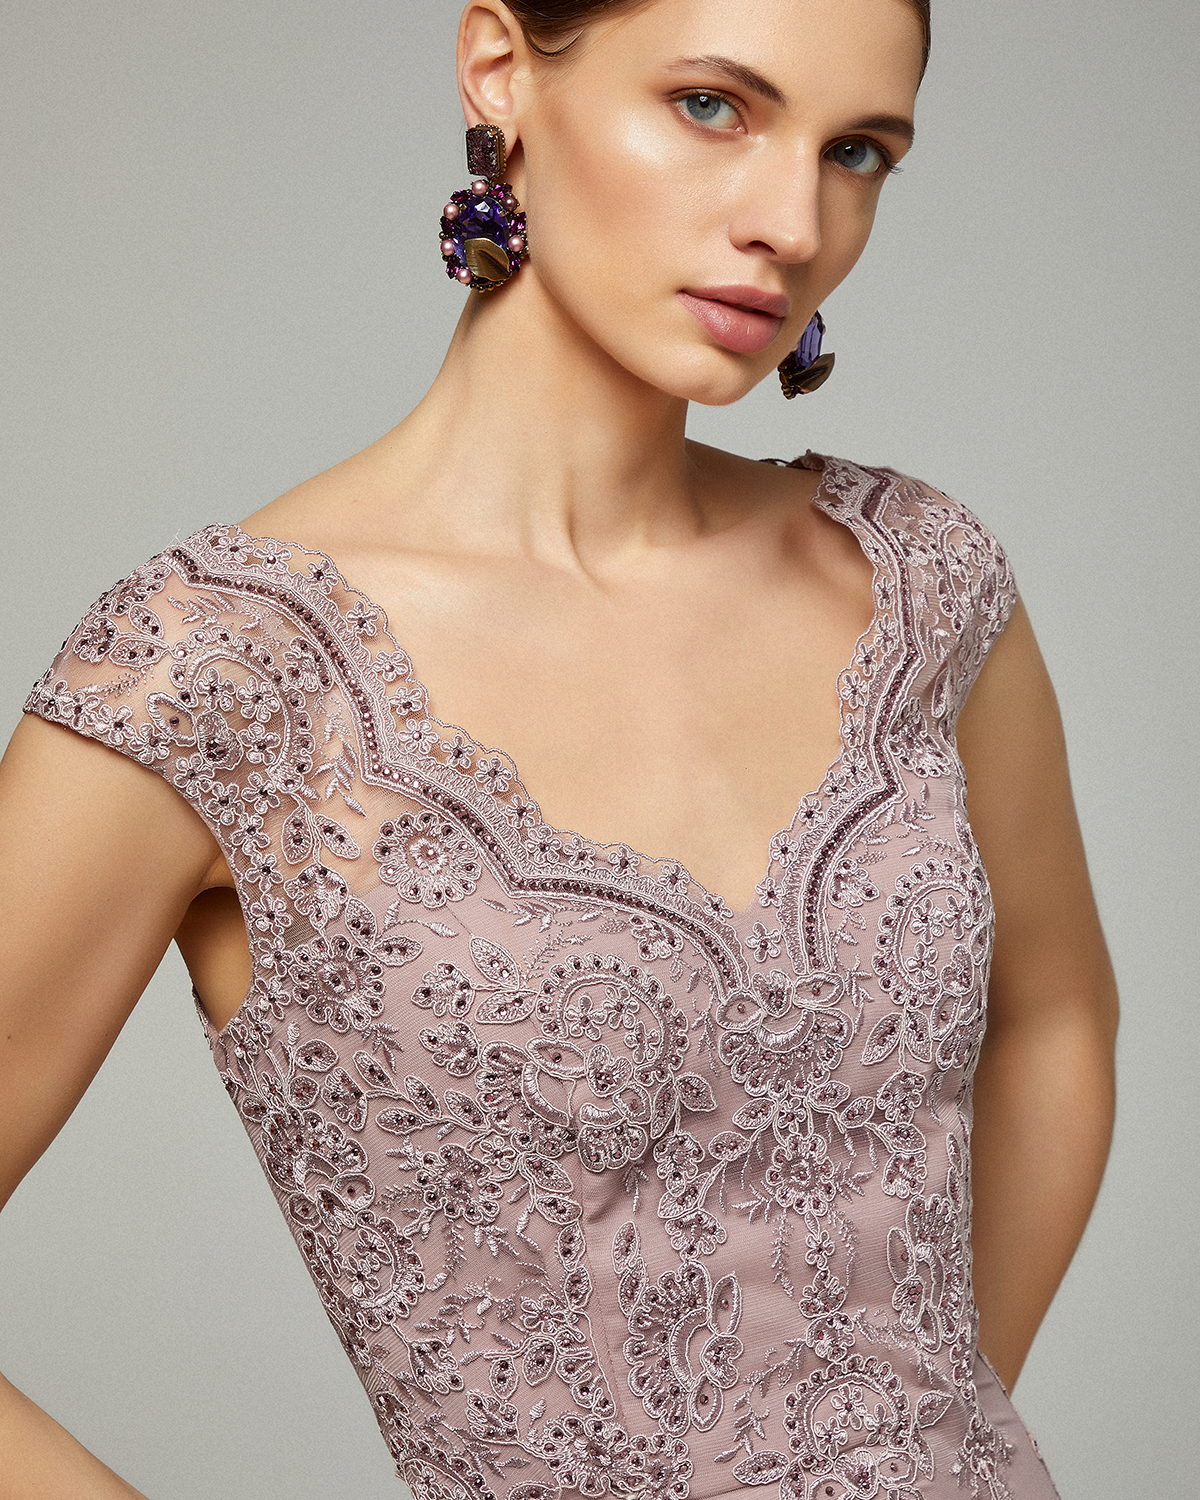 Classic Dresses / Long evening chiffon dress with lace top  for the mother of the bride